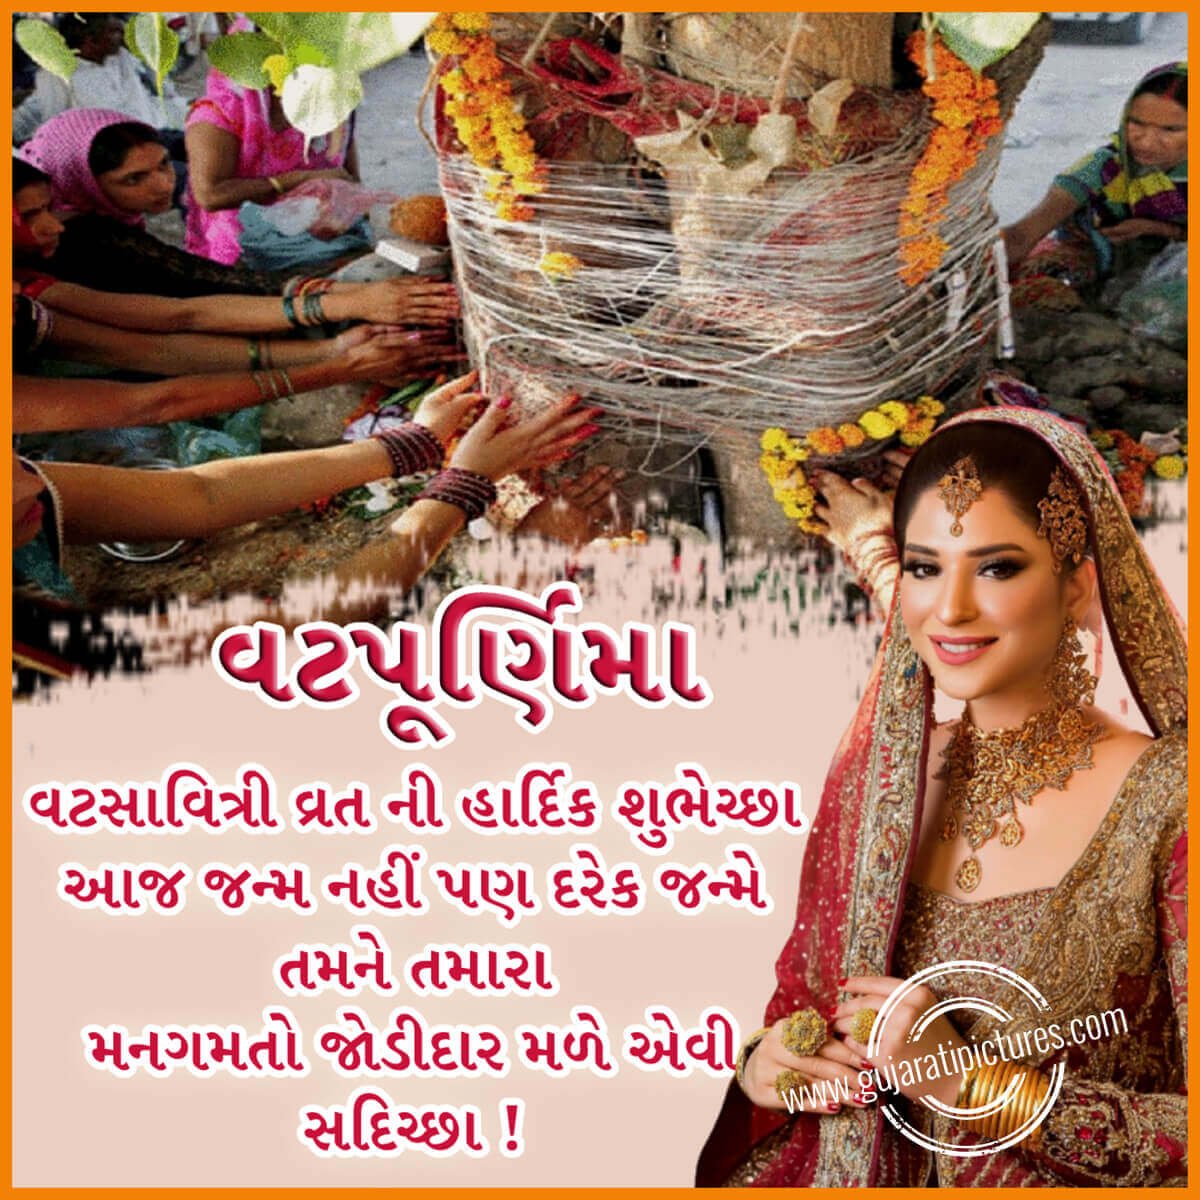 Happy Vat Purnima To You And Your Family Gujarati Pictures Website